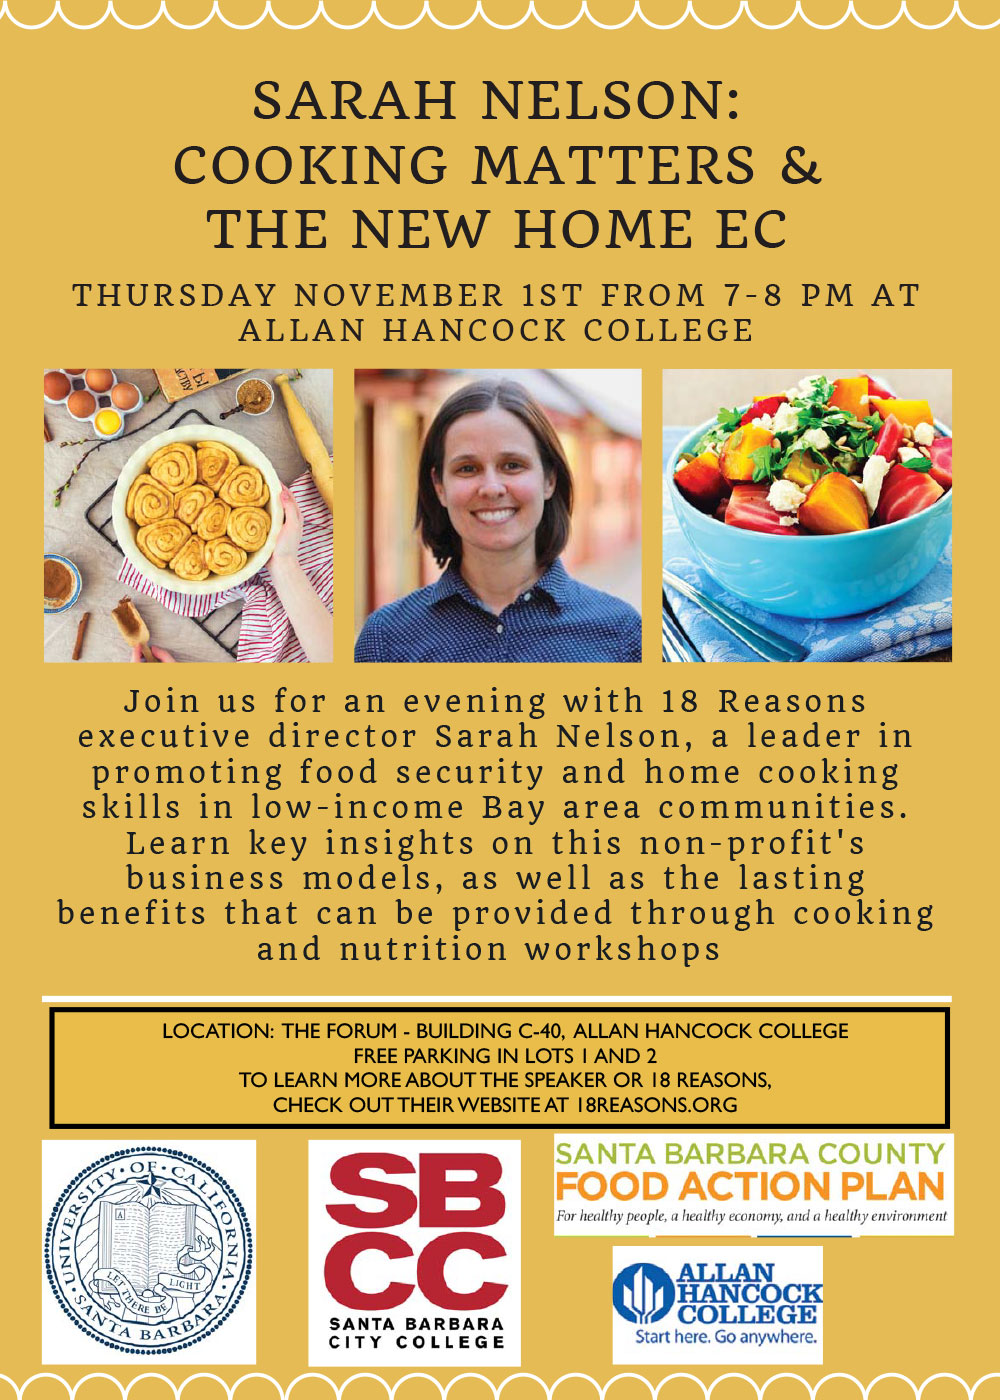 Sarah Nelson: Cooking Matters & The New Home Ec